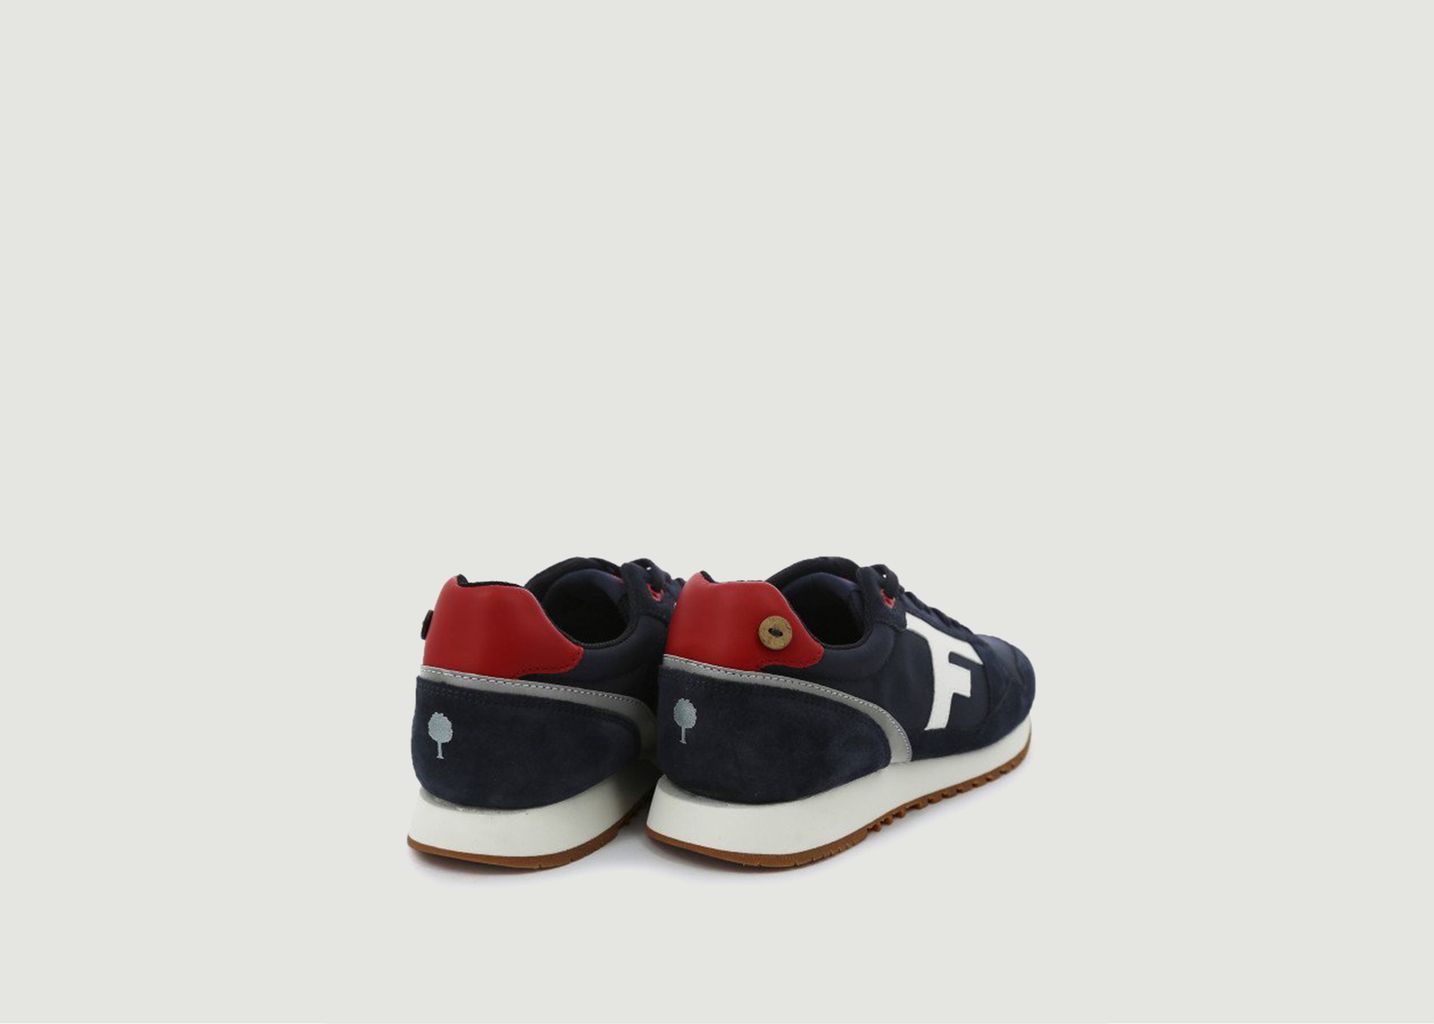 Elm low two-piece running sneakers - Faguo